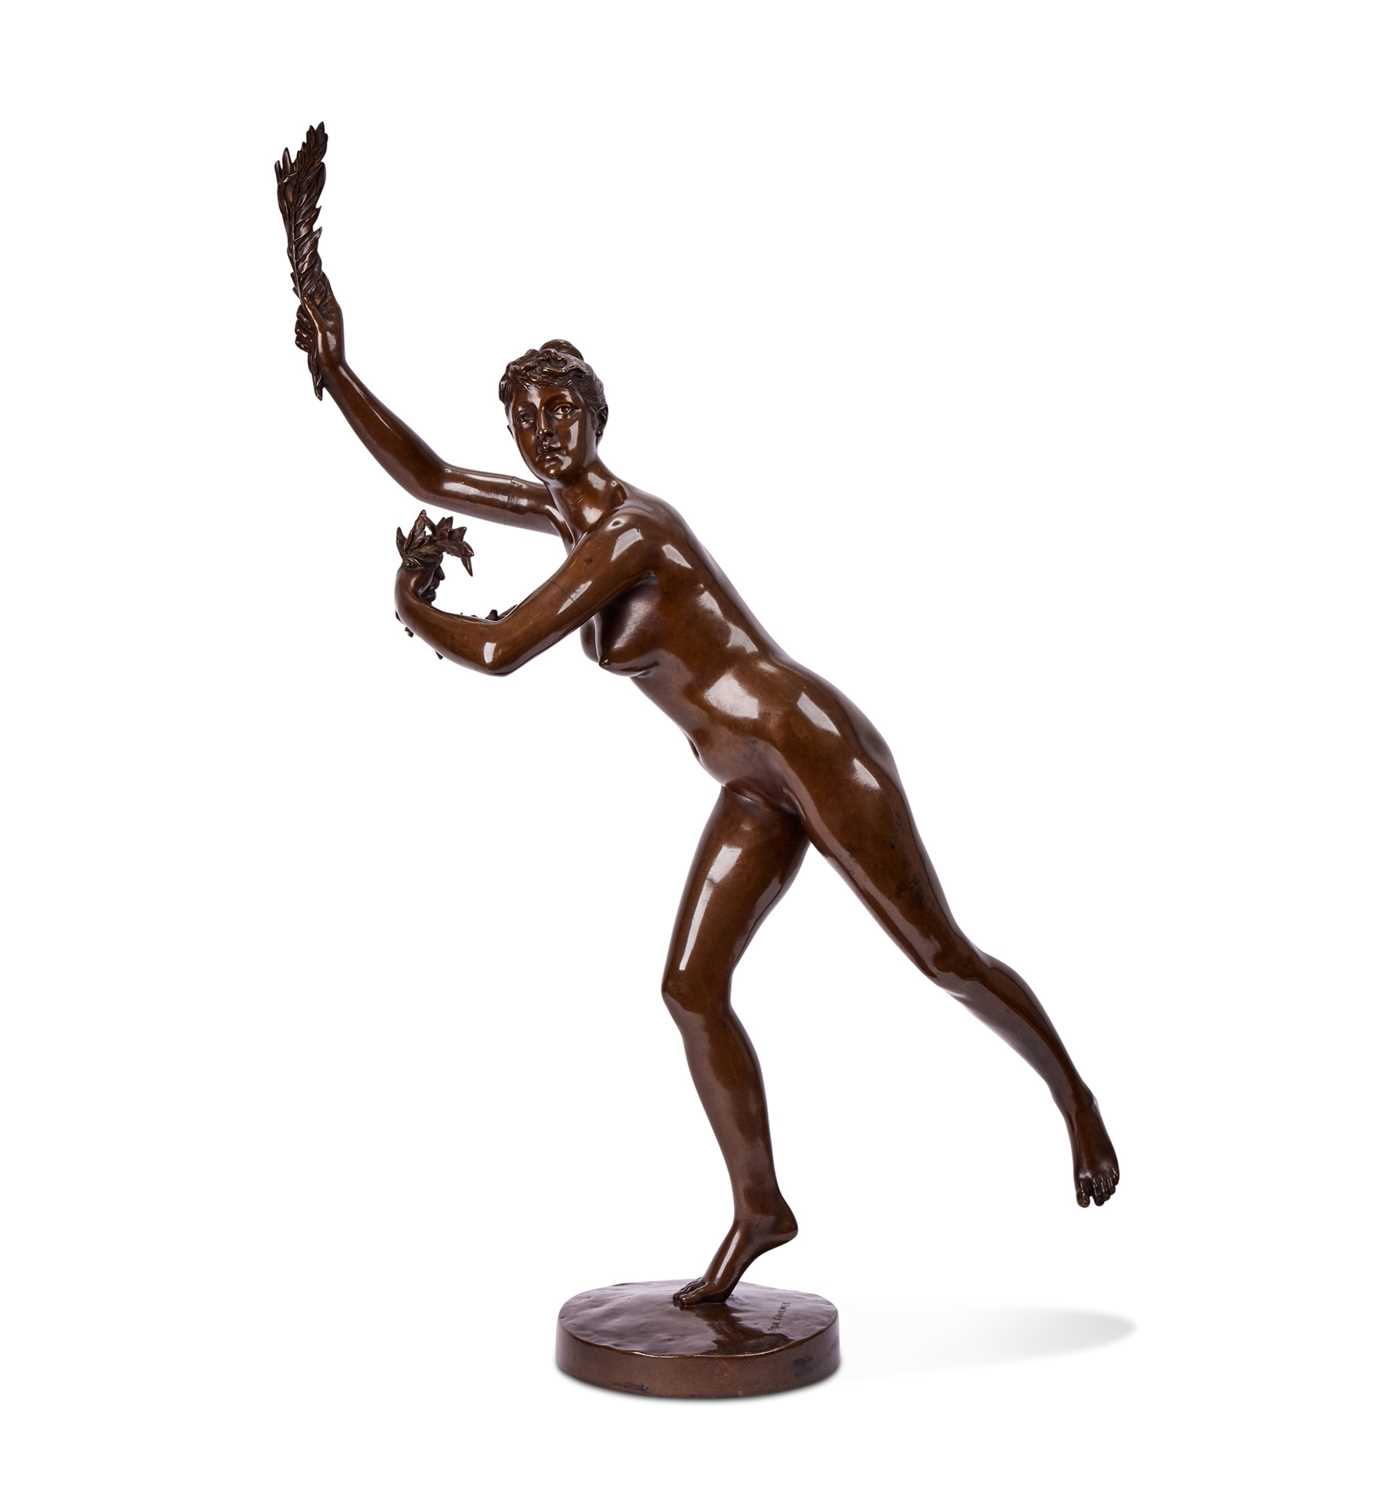 PAUL FOURNIER (FRENCH, 1859-1926): A LARGE BRONZE FIGURE OF A RUNNING GIRL CAST BY BARBEDIENNE